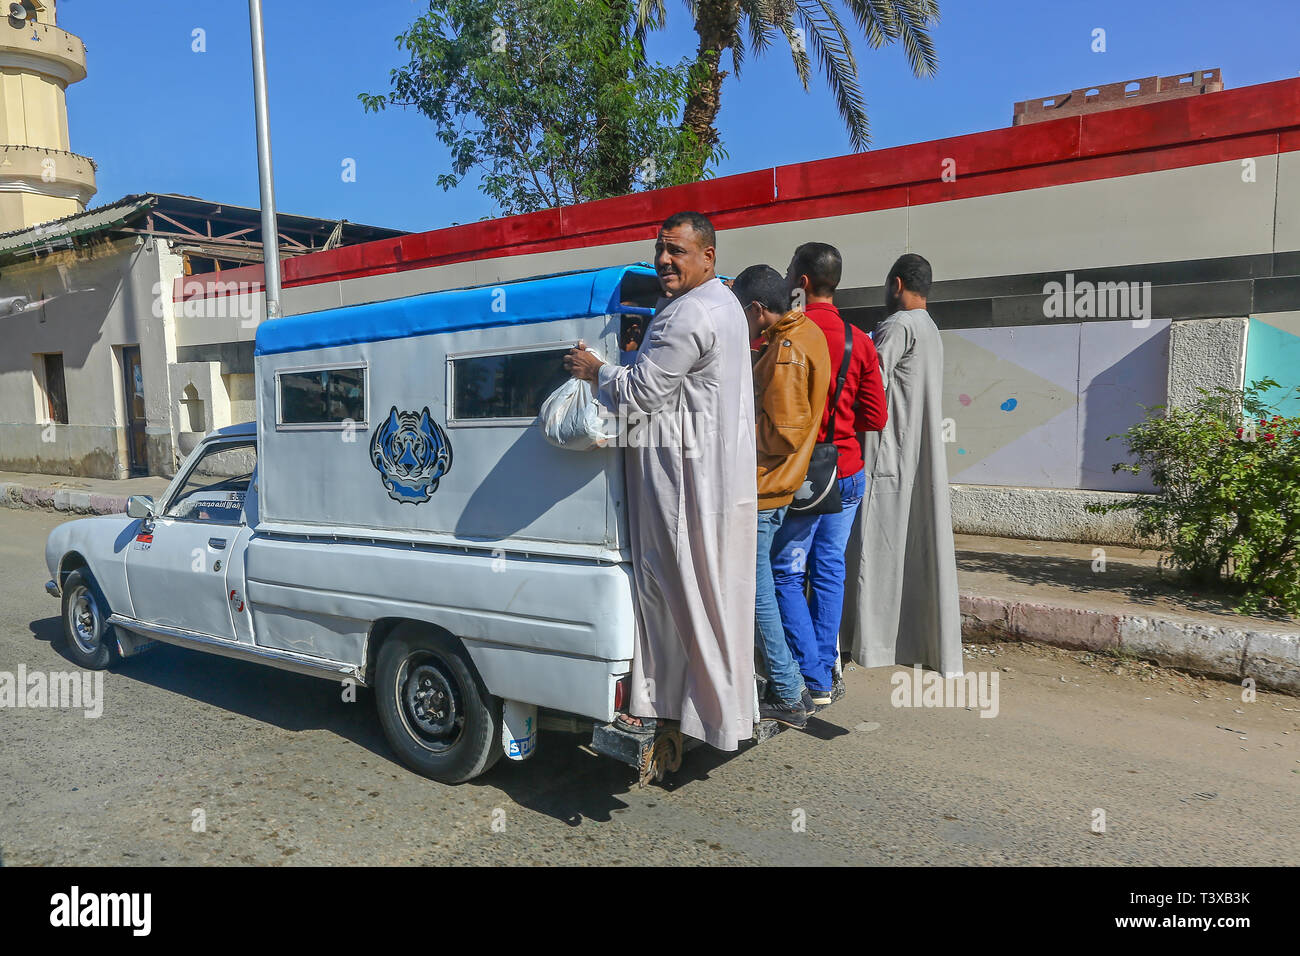 4 Arab men hitching a lift on the back of a truck at Aswan, Egypt, Africa Stock Photo